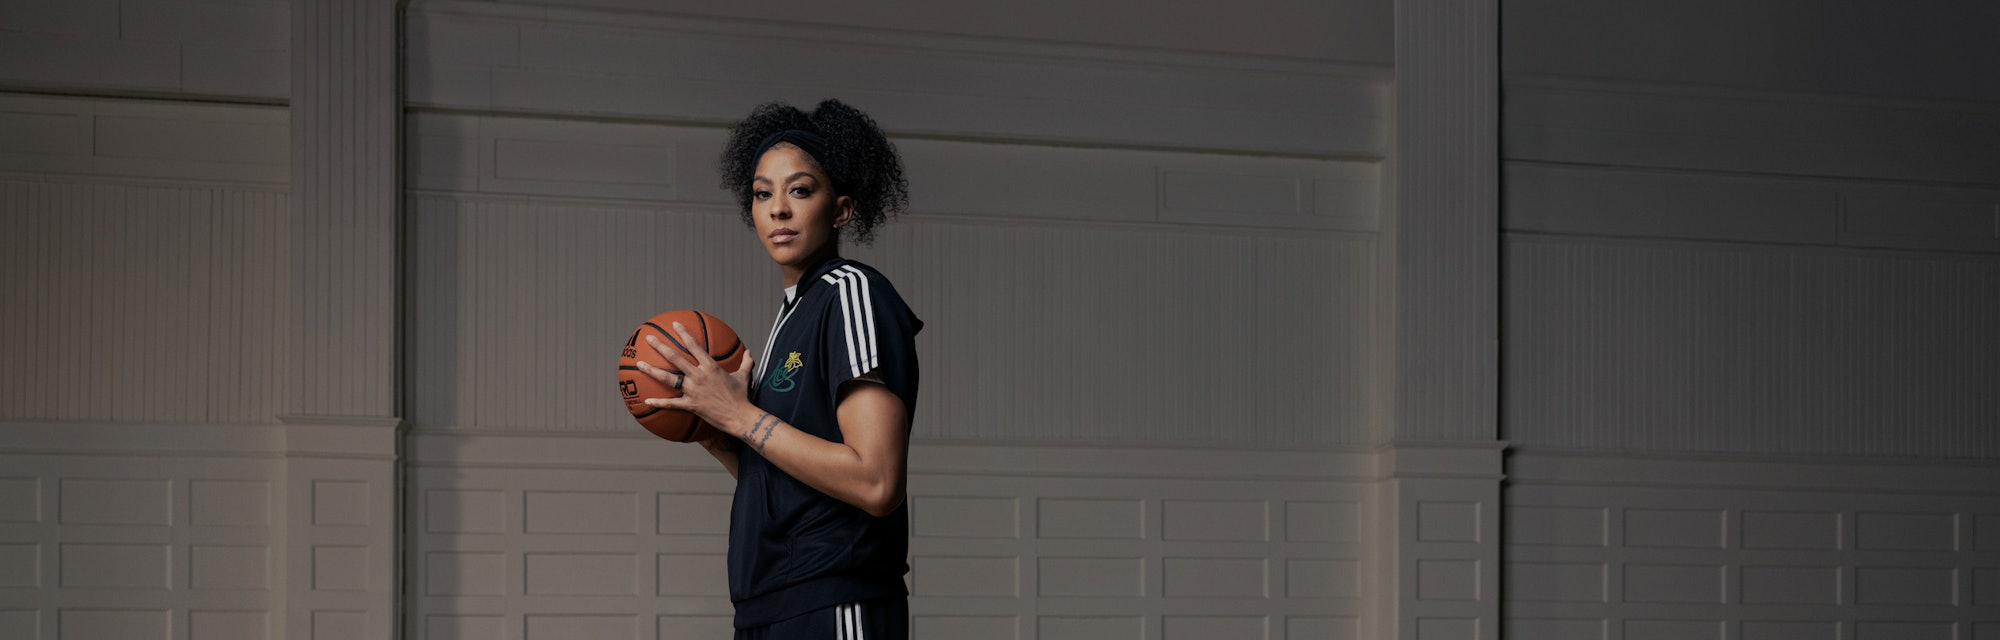 Adidas and Candace Parker's second signature sneaker, the Exhibit B, in gray